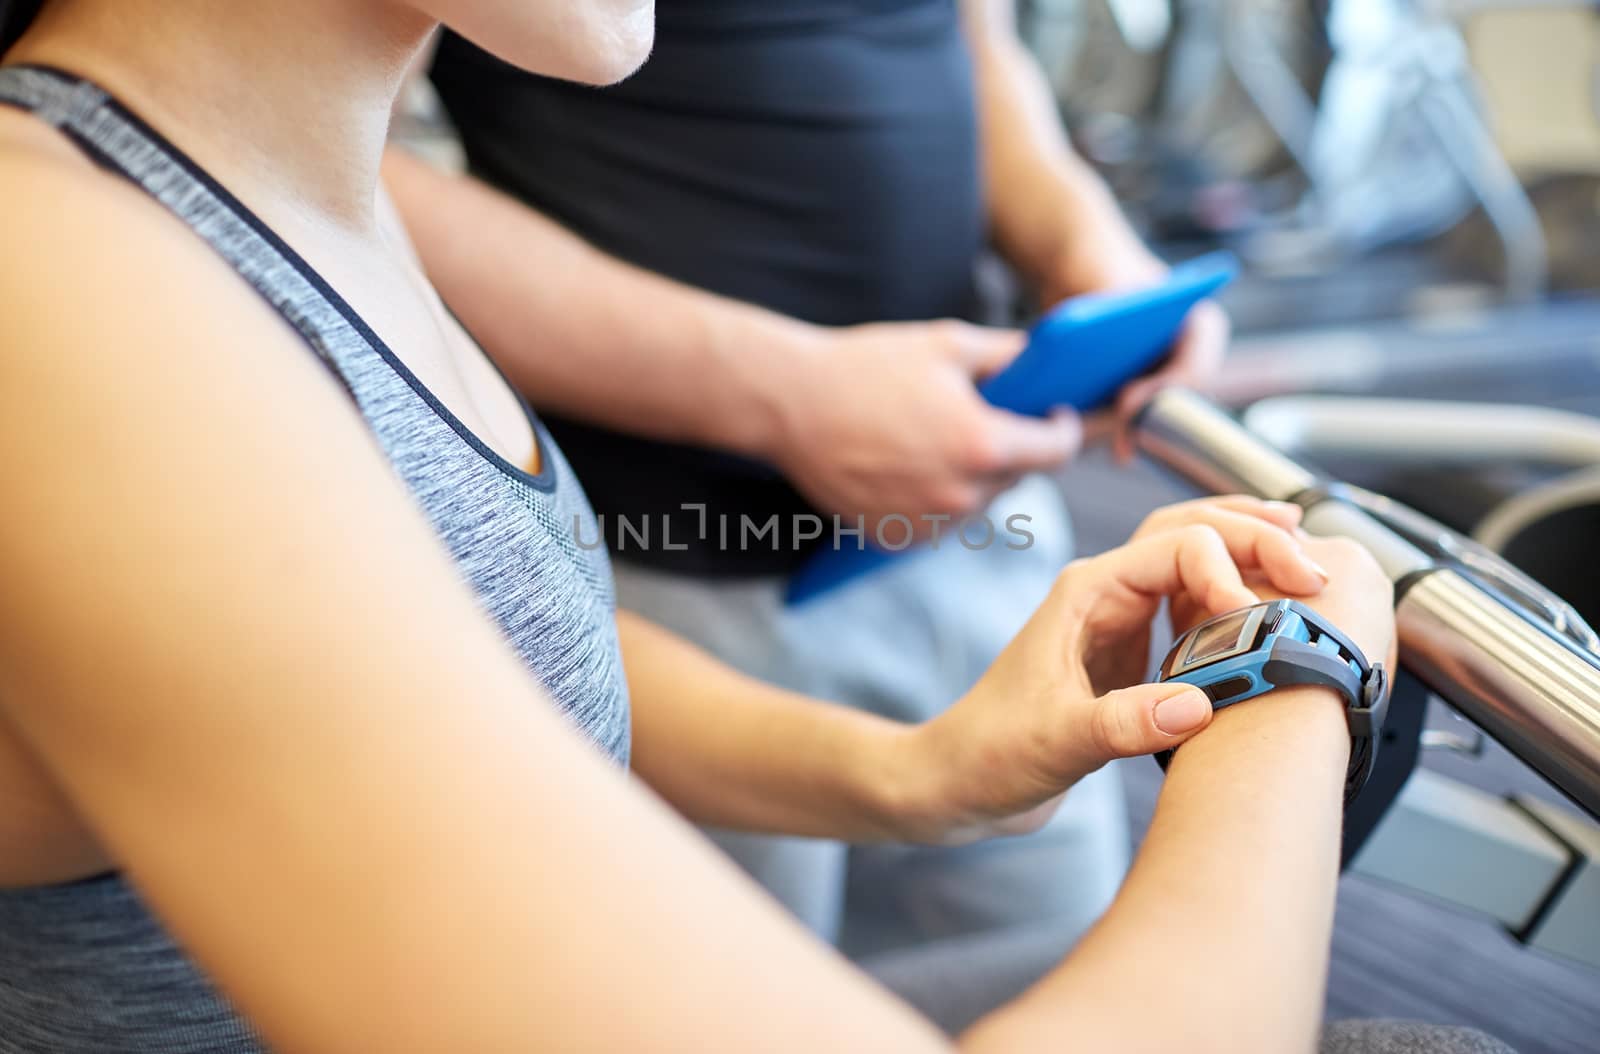 sport, fitness, lifestyle, technology and people concept - close up of woman setting heart-rate watch at gym with trainer